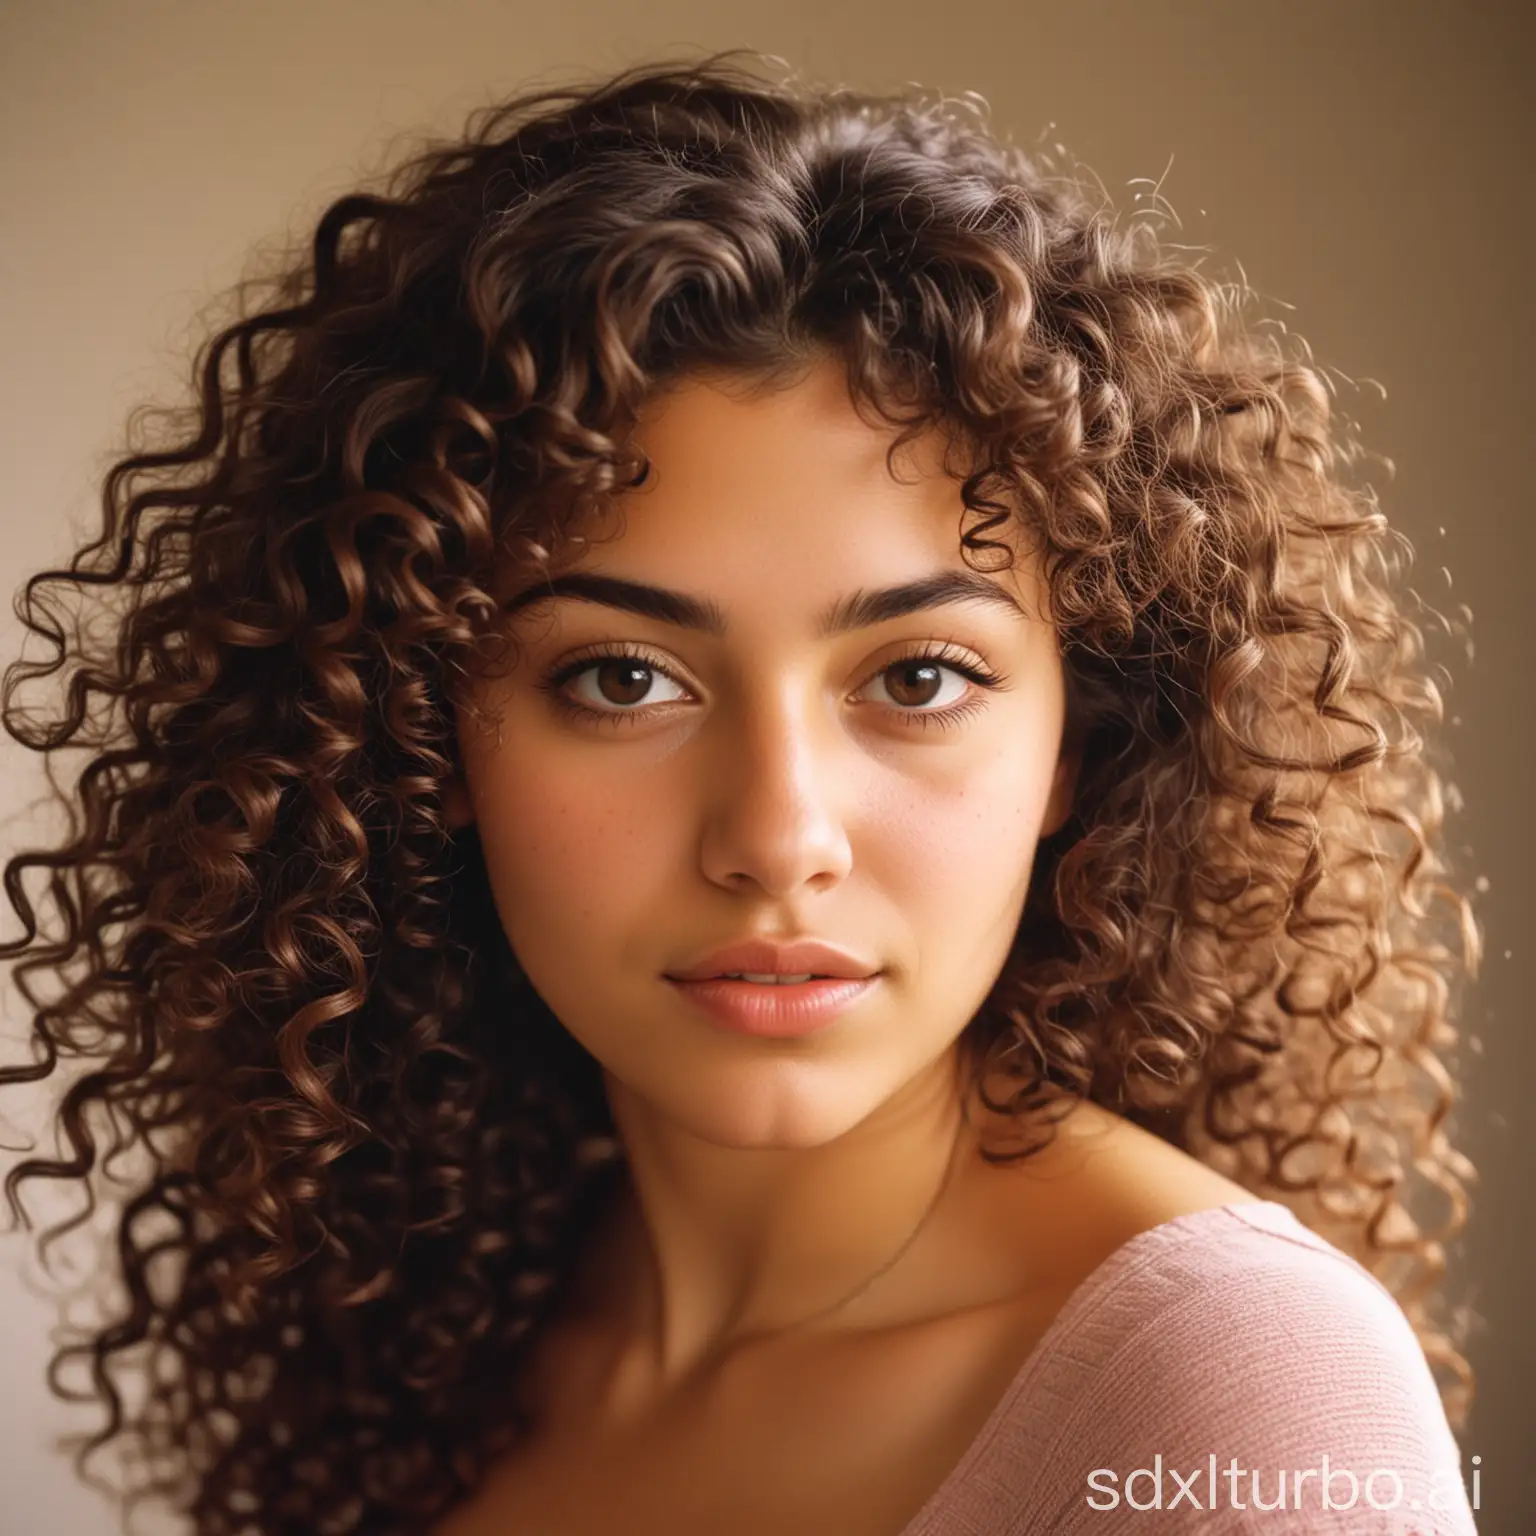 HyperRealistic-Portrait-of-a-21YearOld-Latina-with-Curly-Brown-Hair-and-Brown-Eyes